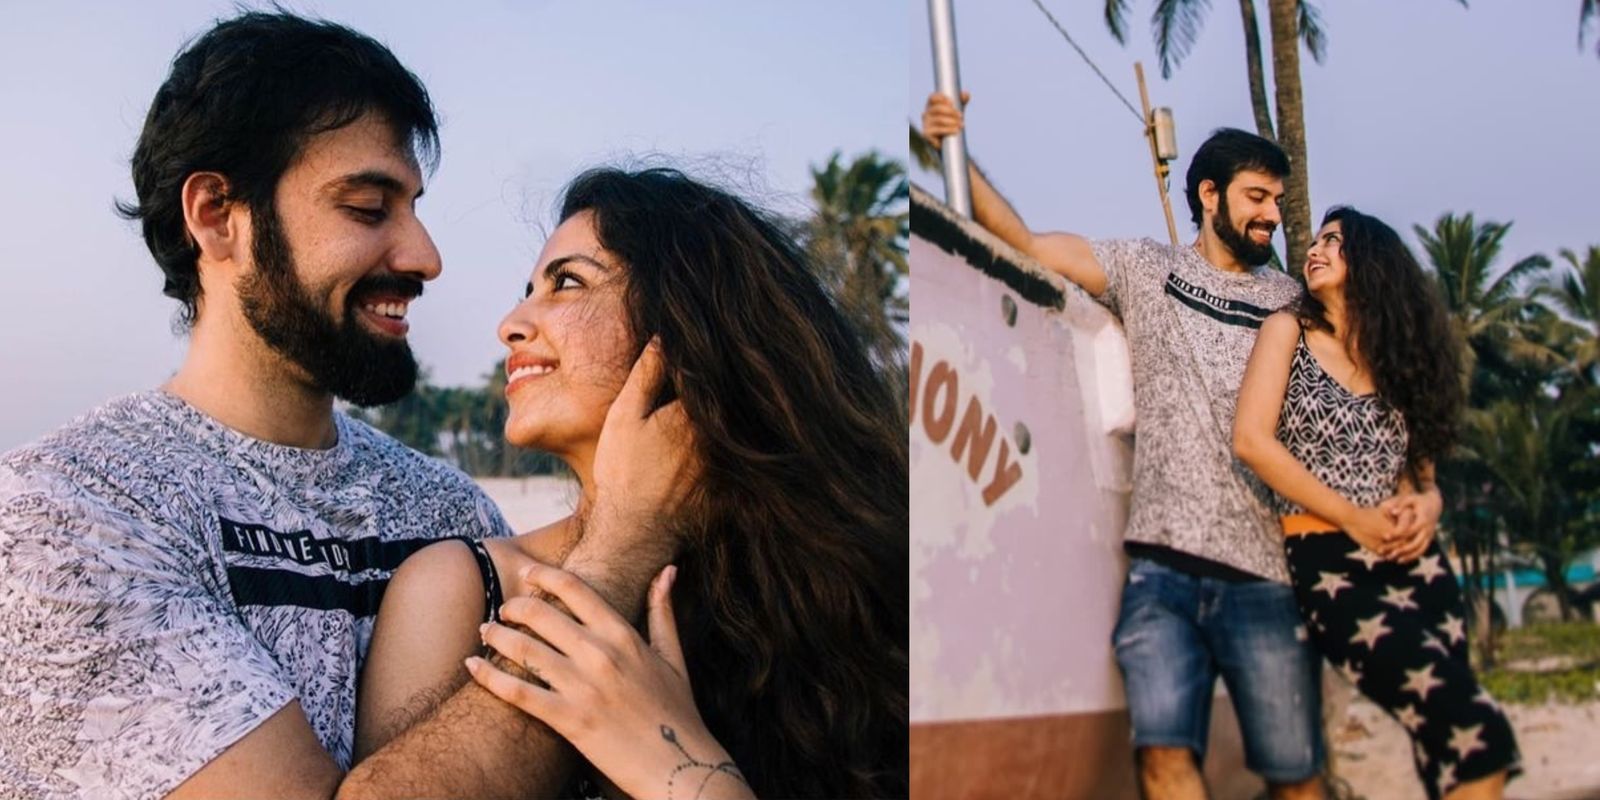 Balika Vadhu Star Avika Gor Finds Love In Milind Chandwani; Says ‘This Kind Human Is Mine, And I’m His Forever’